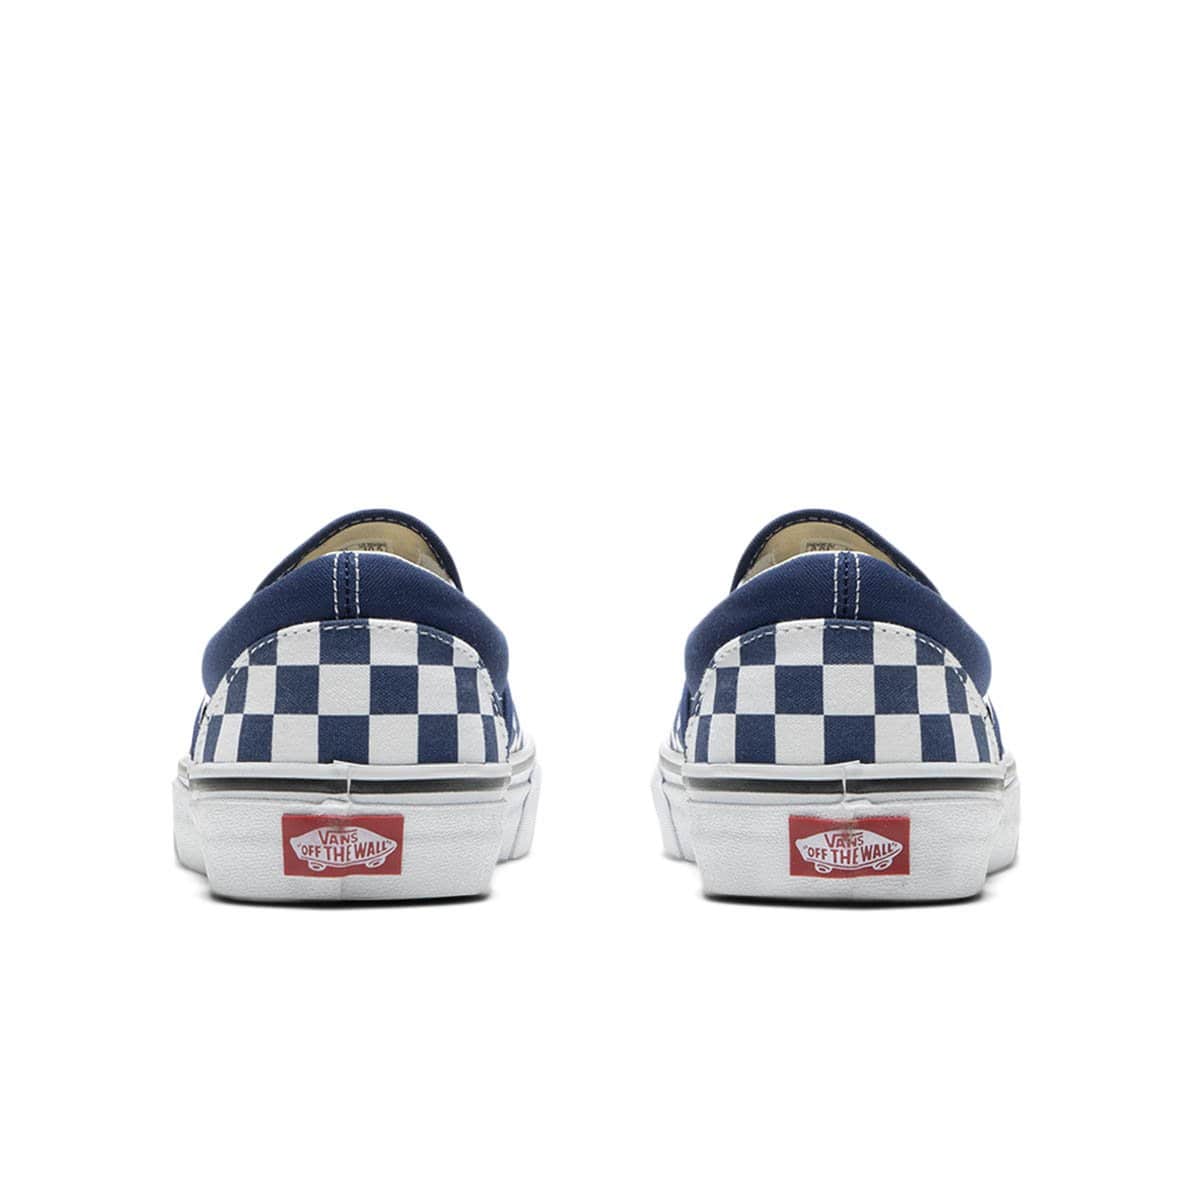 Vans Shoes CLASSIC SLIP-ON (CHECKERBOARD)